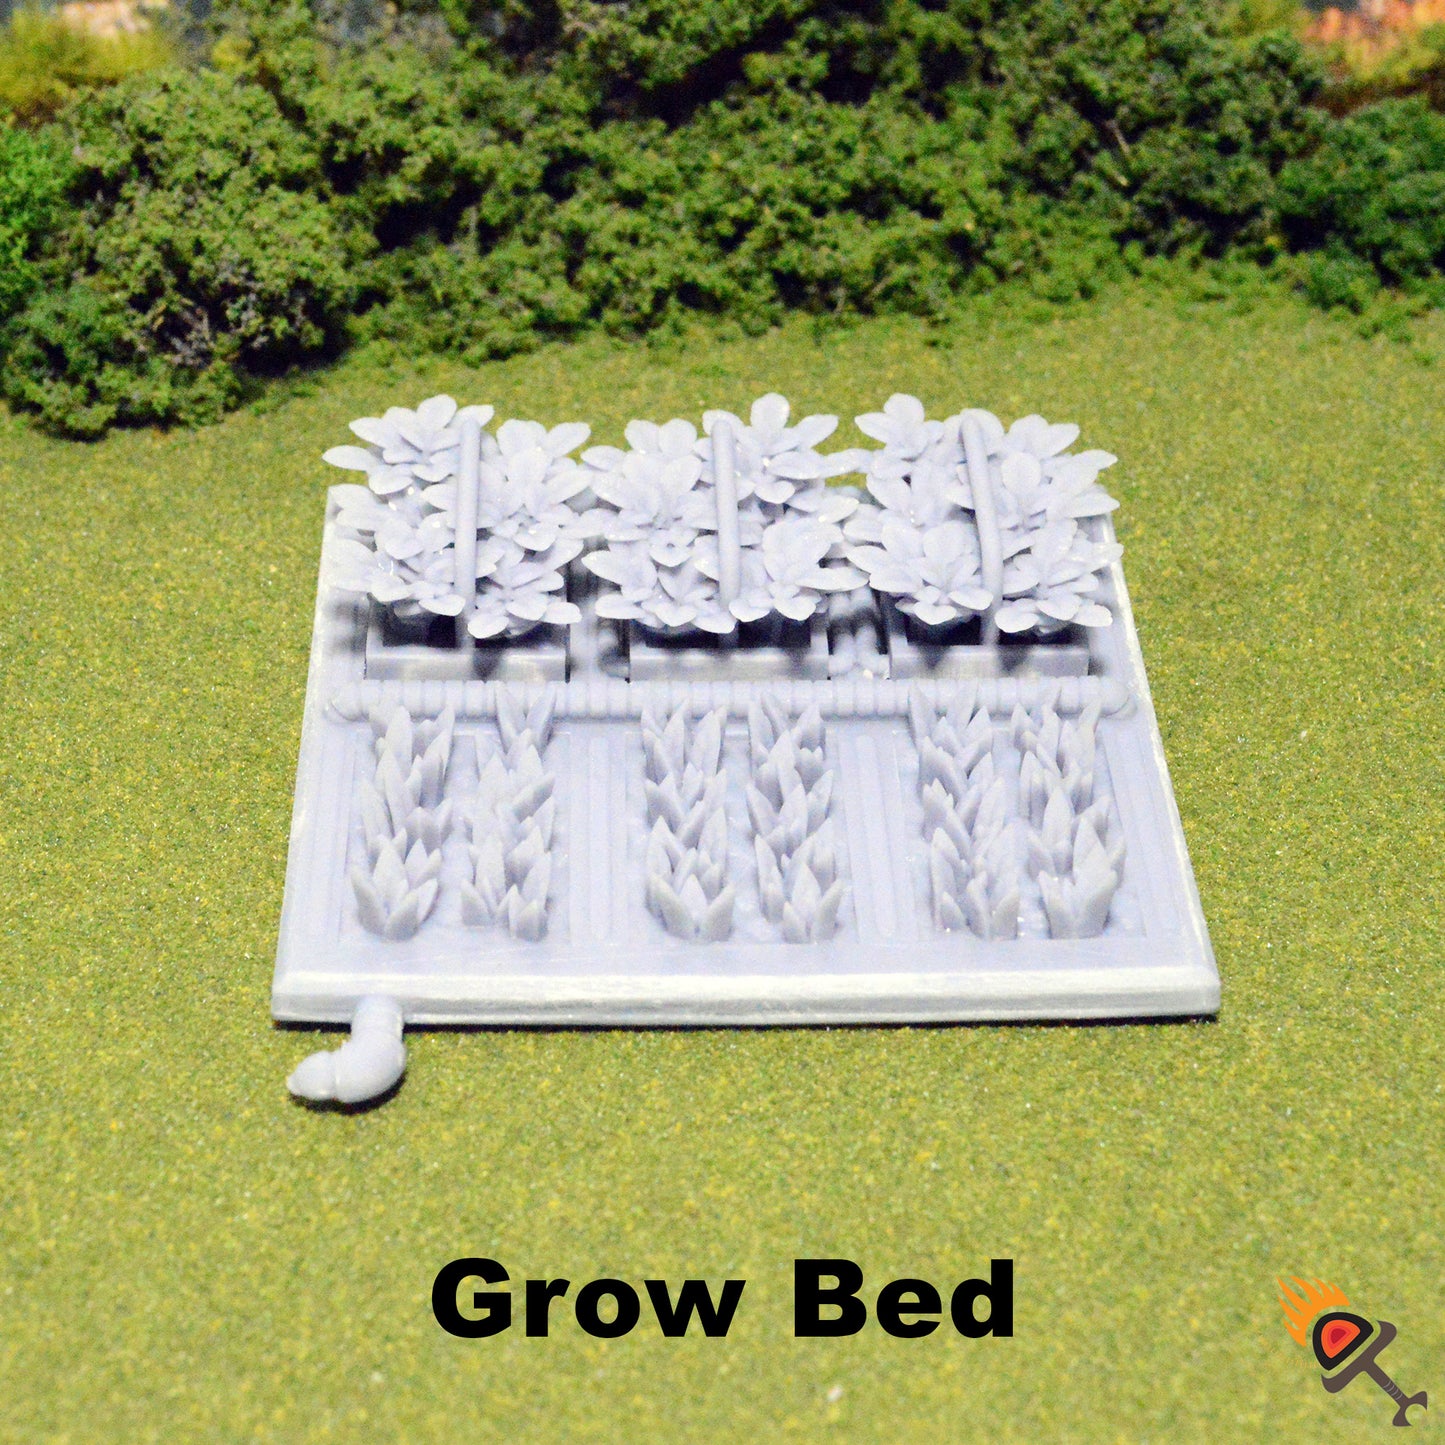 Miniature Plant Grow Beds and Pond 20mm 28mm 32mm for D&D Terrain, Lunar Base Greenhouse Garden for Sci-Fi Fantasy DnD Pathfinder